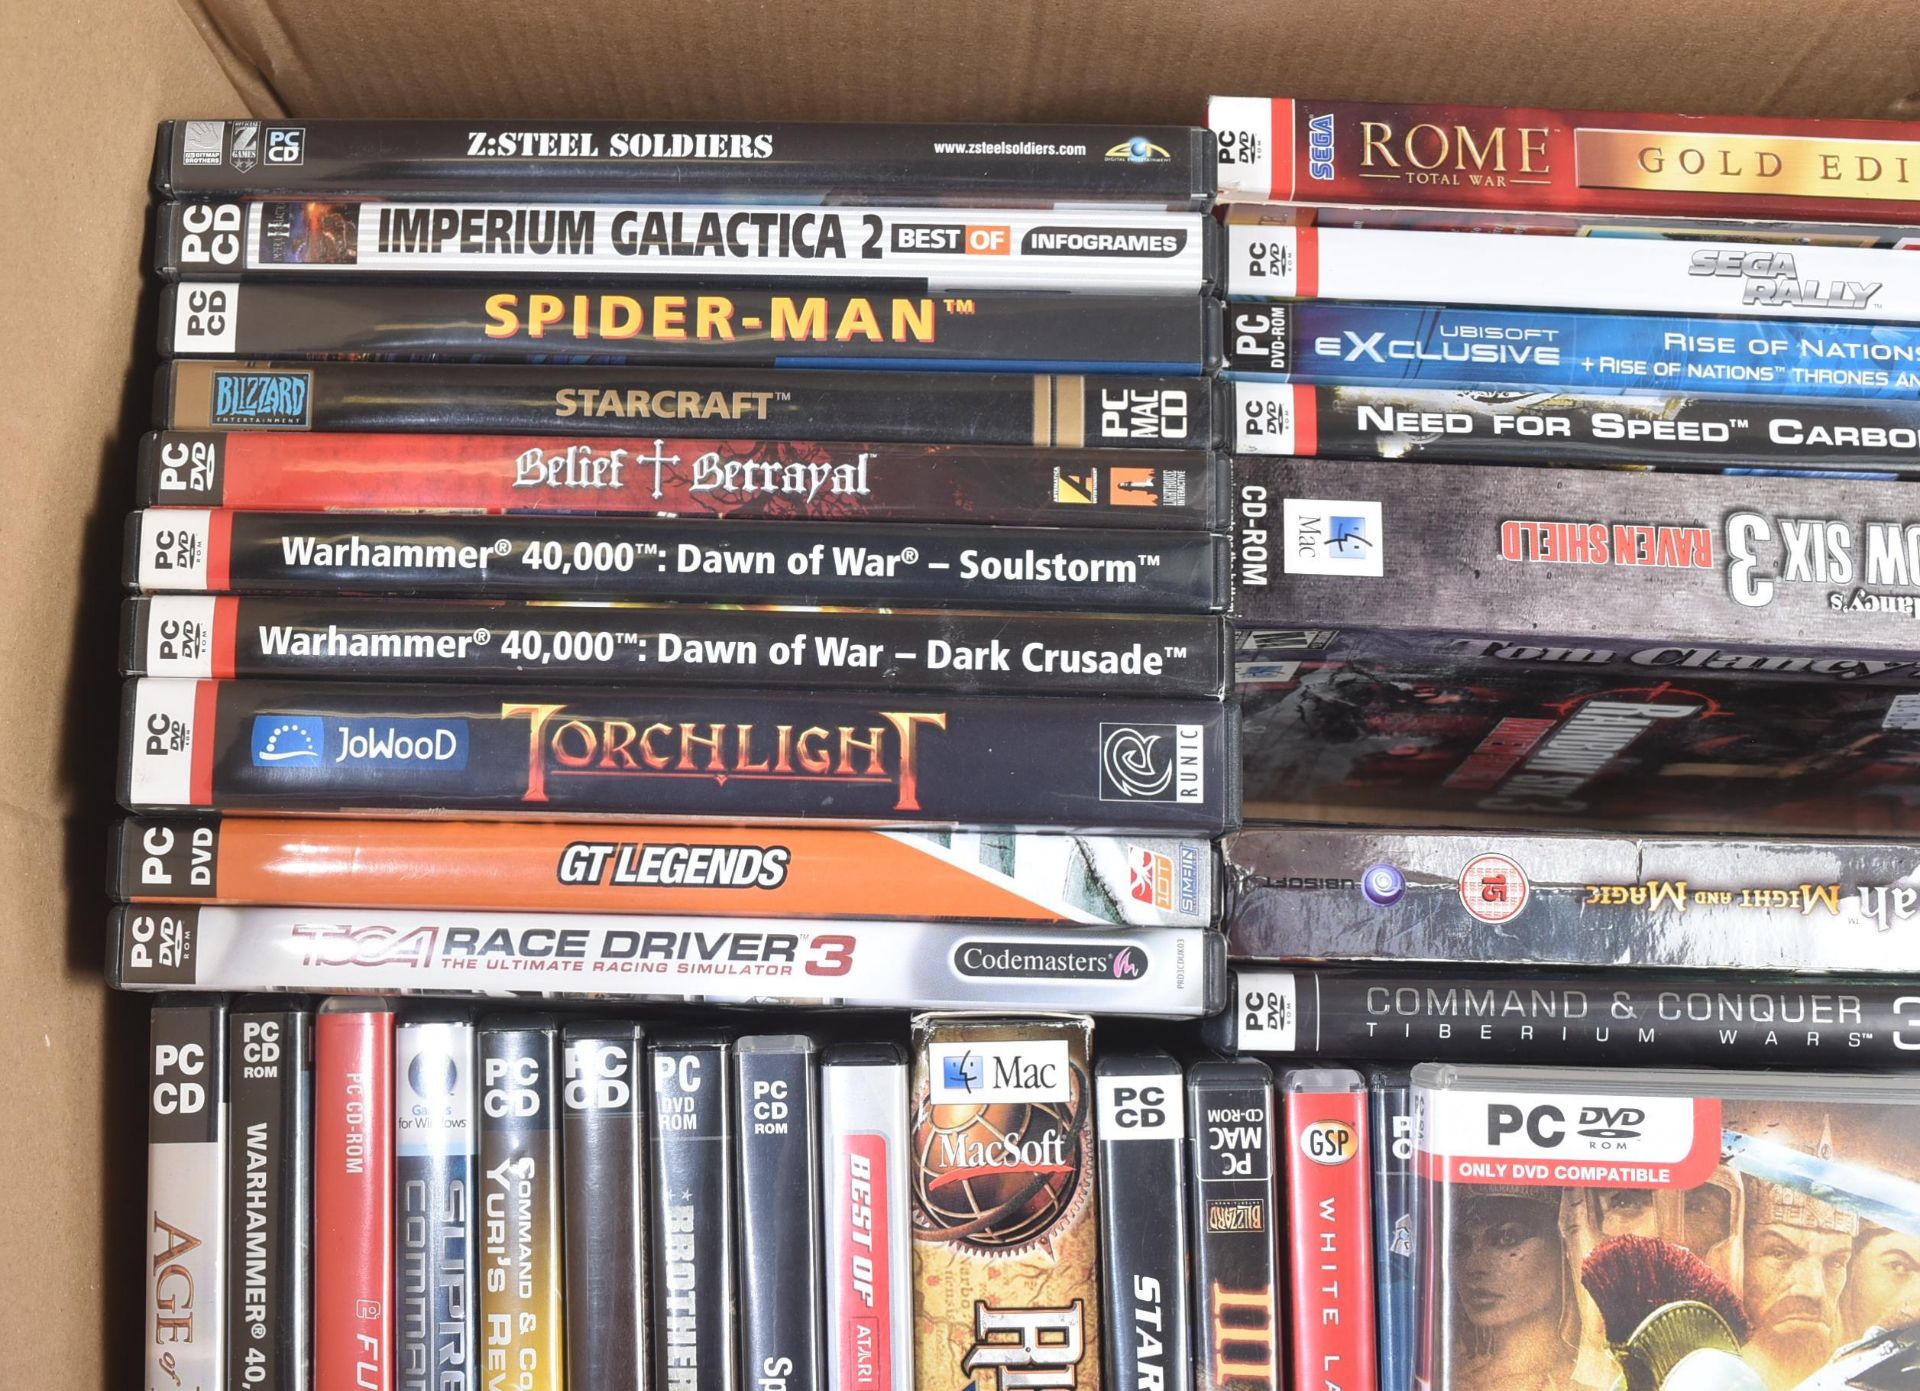 COLLECTION OF VINTAGE PC CD ROM / PC DVD VIDEO GAMES - Image 3 of 5